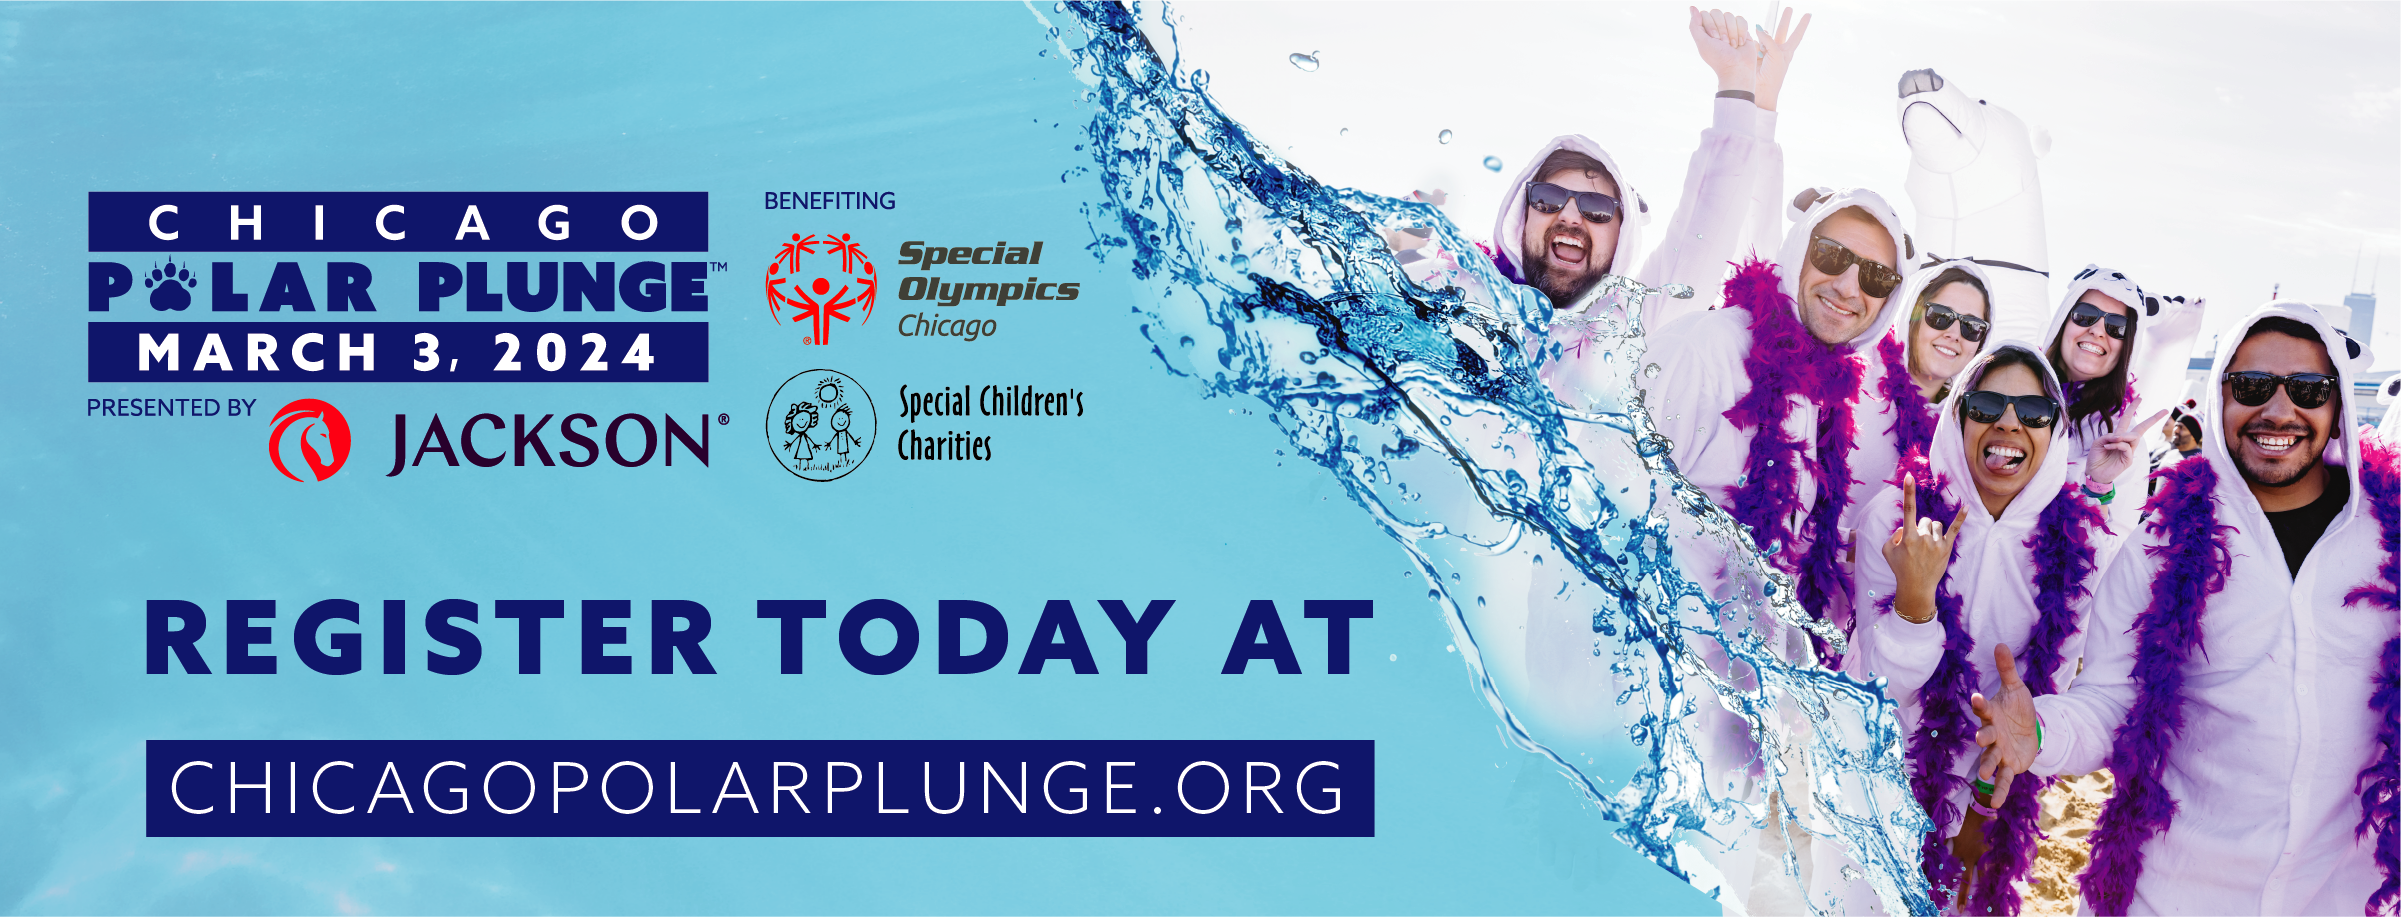 The 2024 Chicago Polar Plunge presented by Jackson - Special